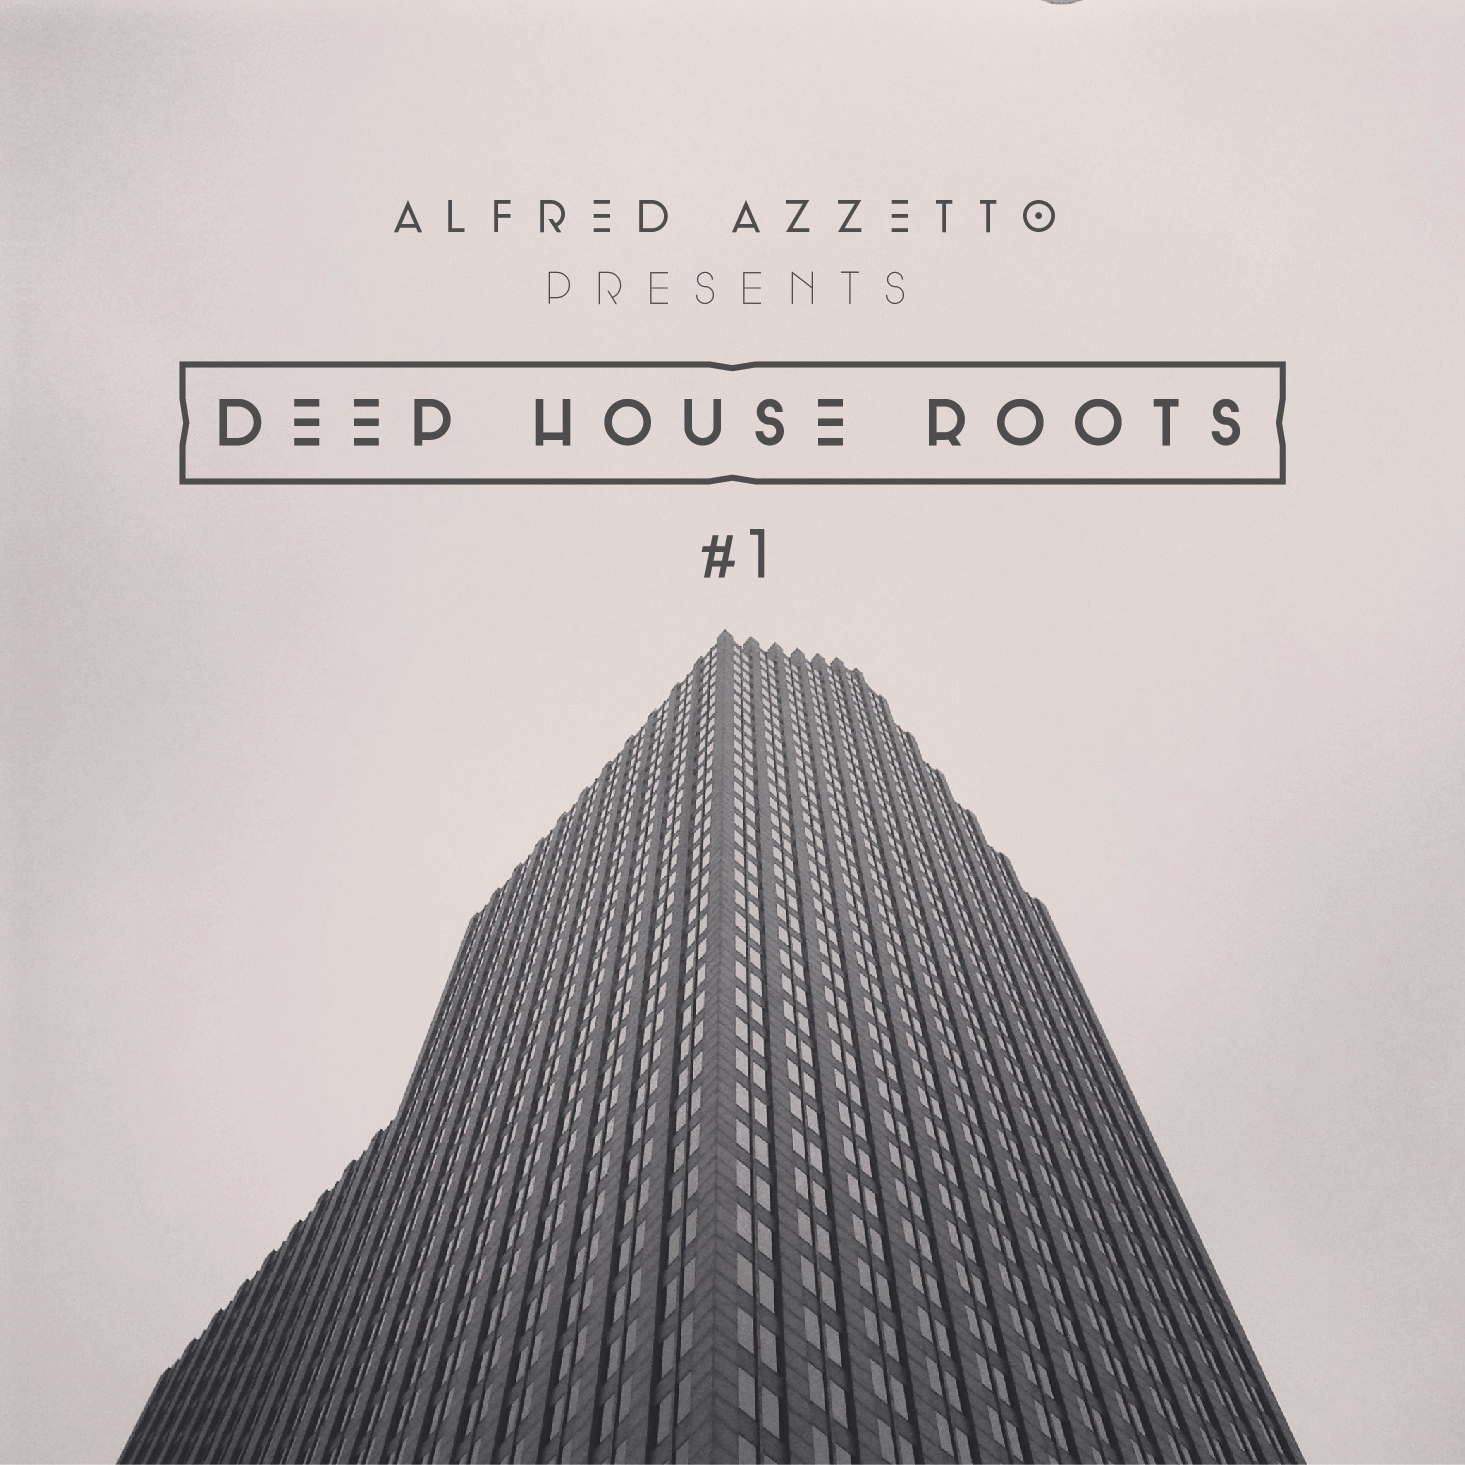 Alfred Azzetto presents Deep House Roots vol. 1